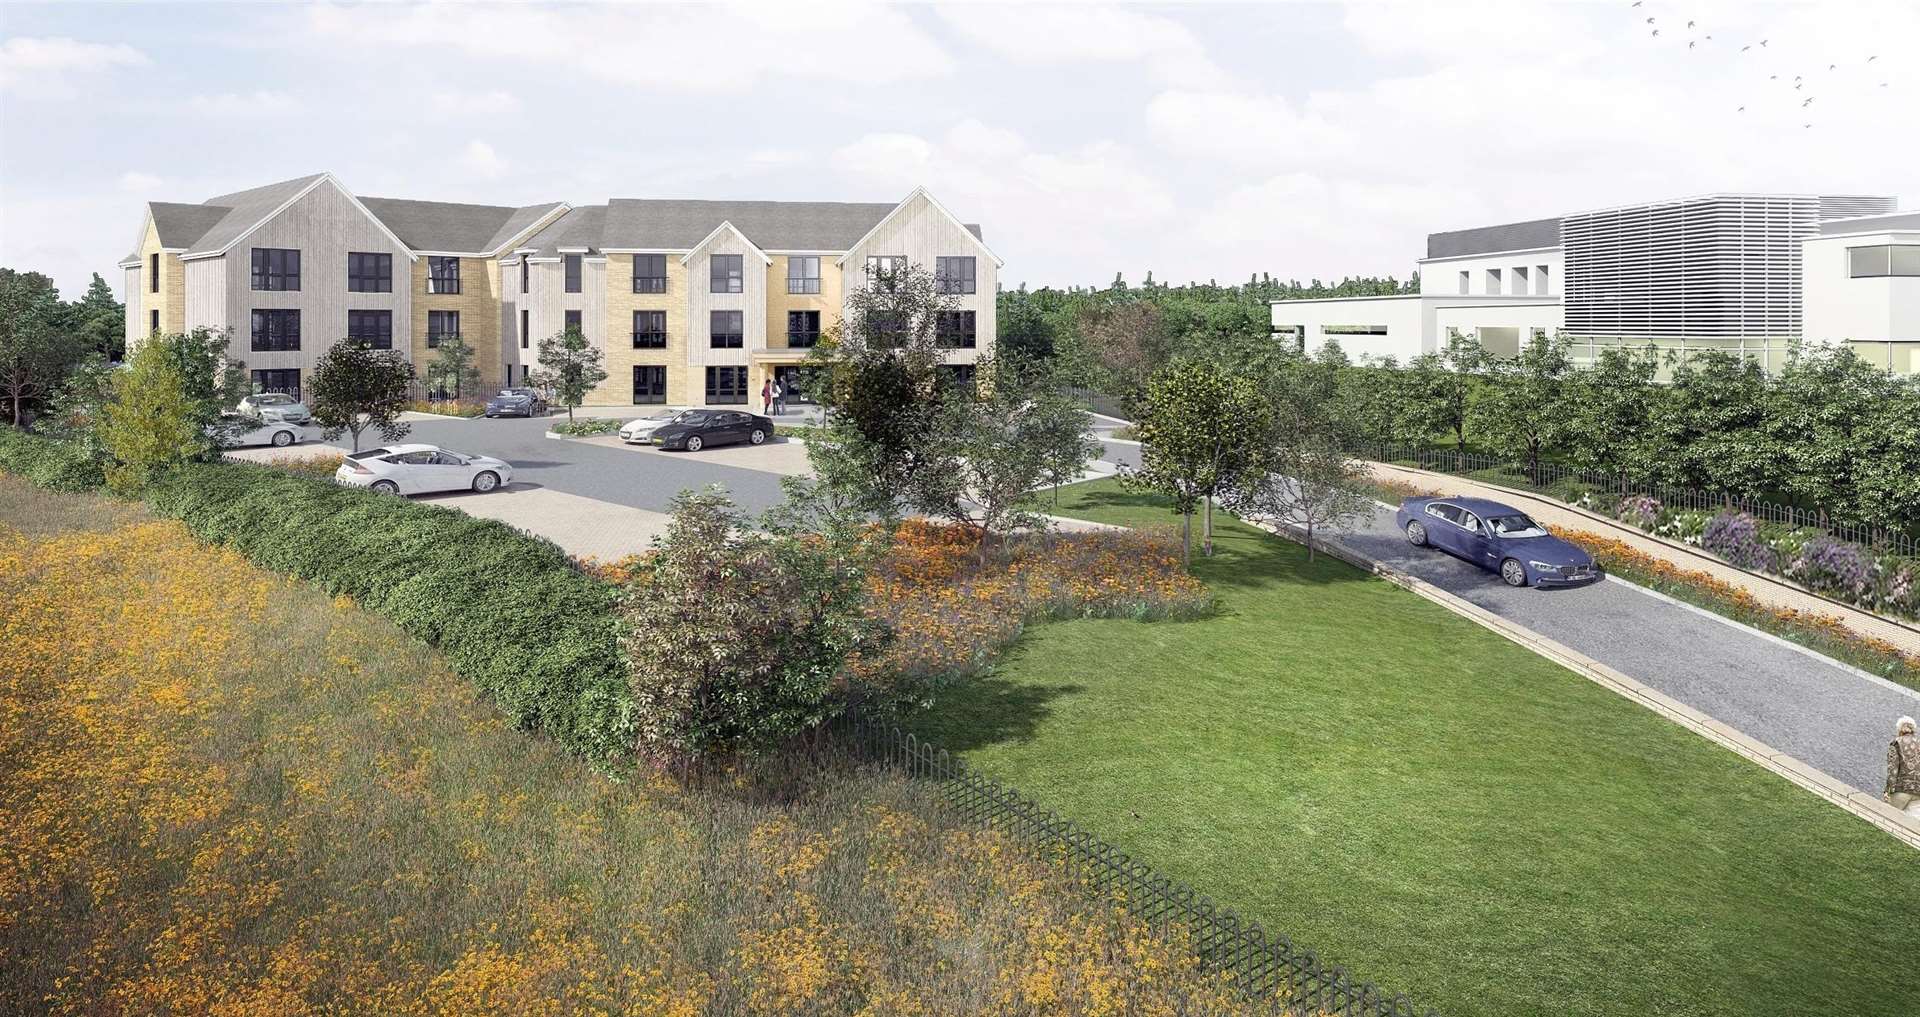 Plans for a 68-bed care home near the William Harvey Hospital